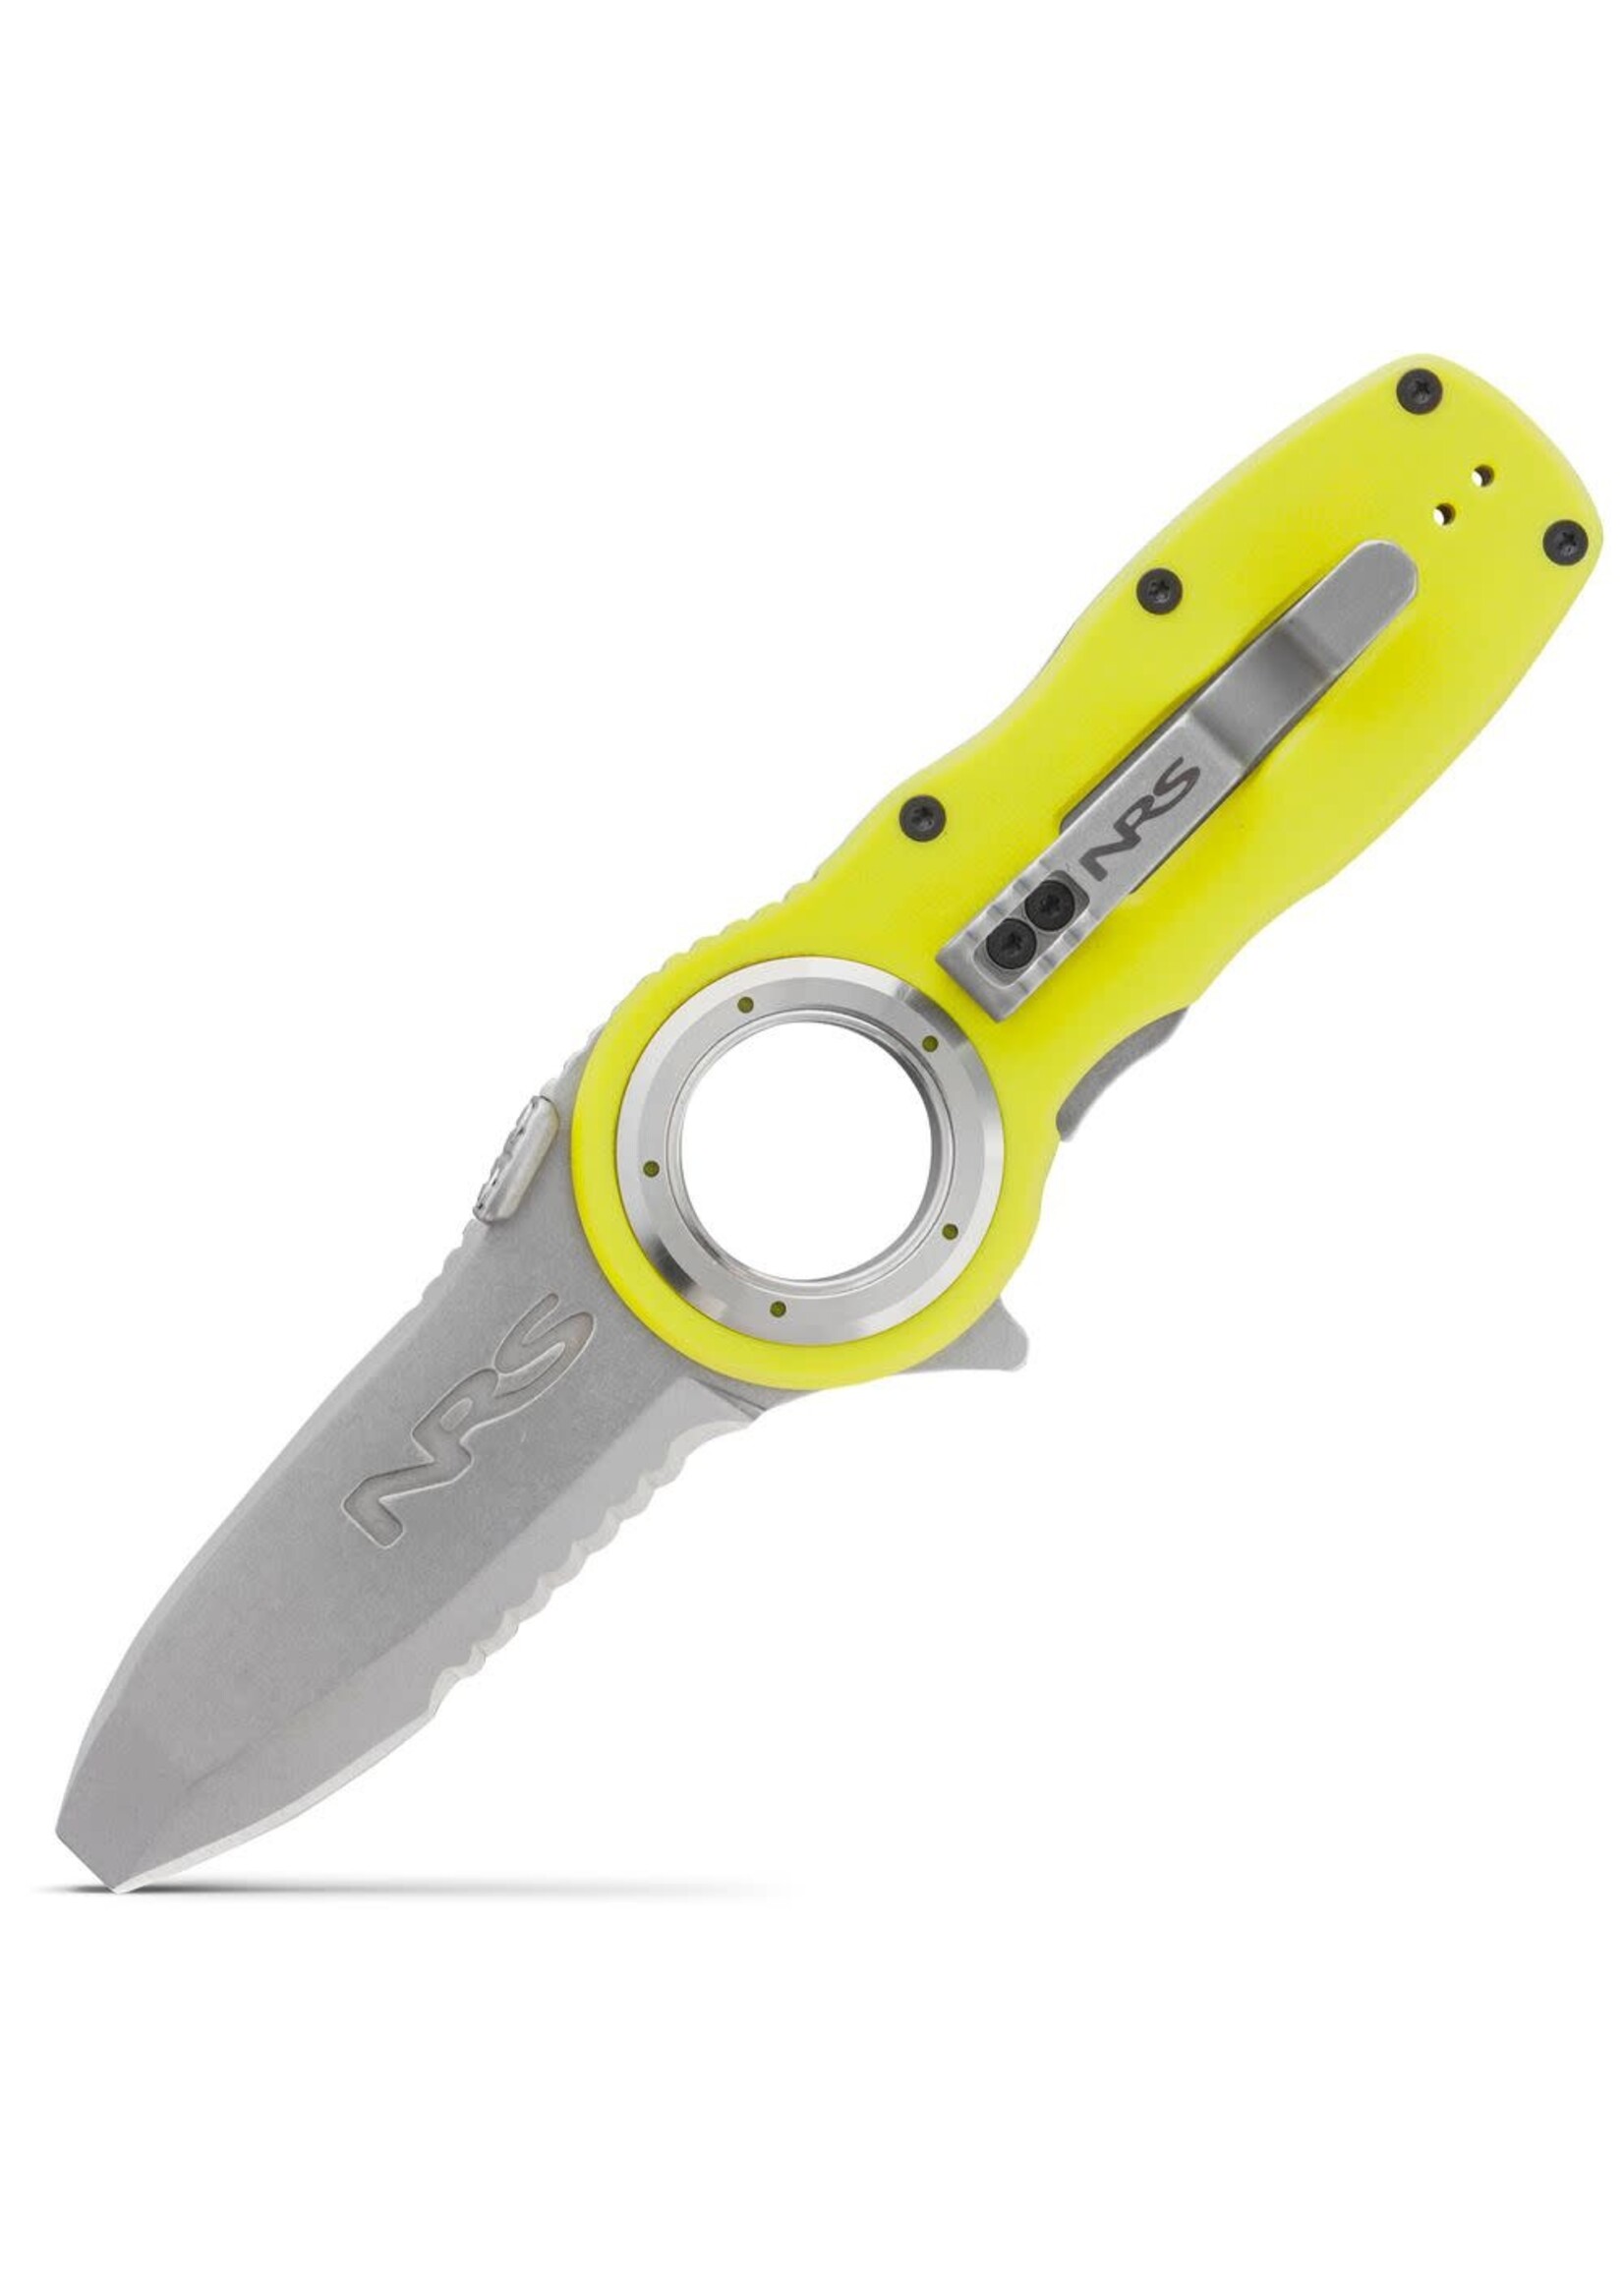 NRS Pilot Access Knife Safety Yellow